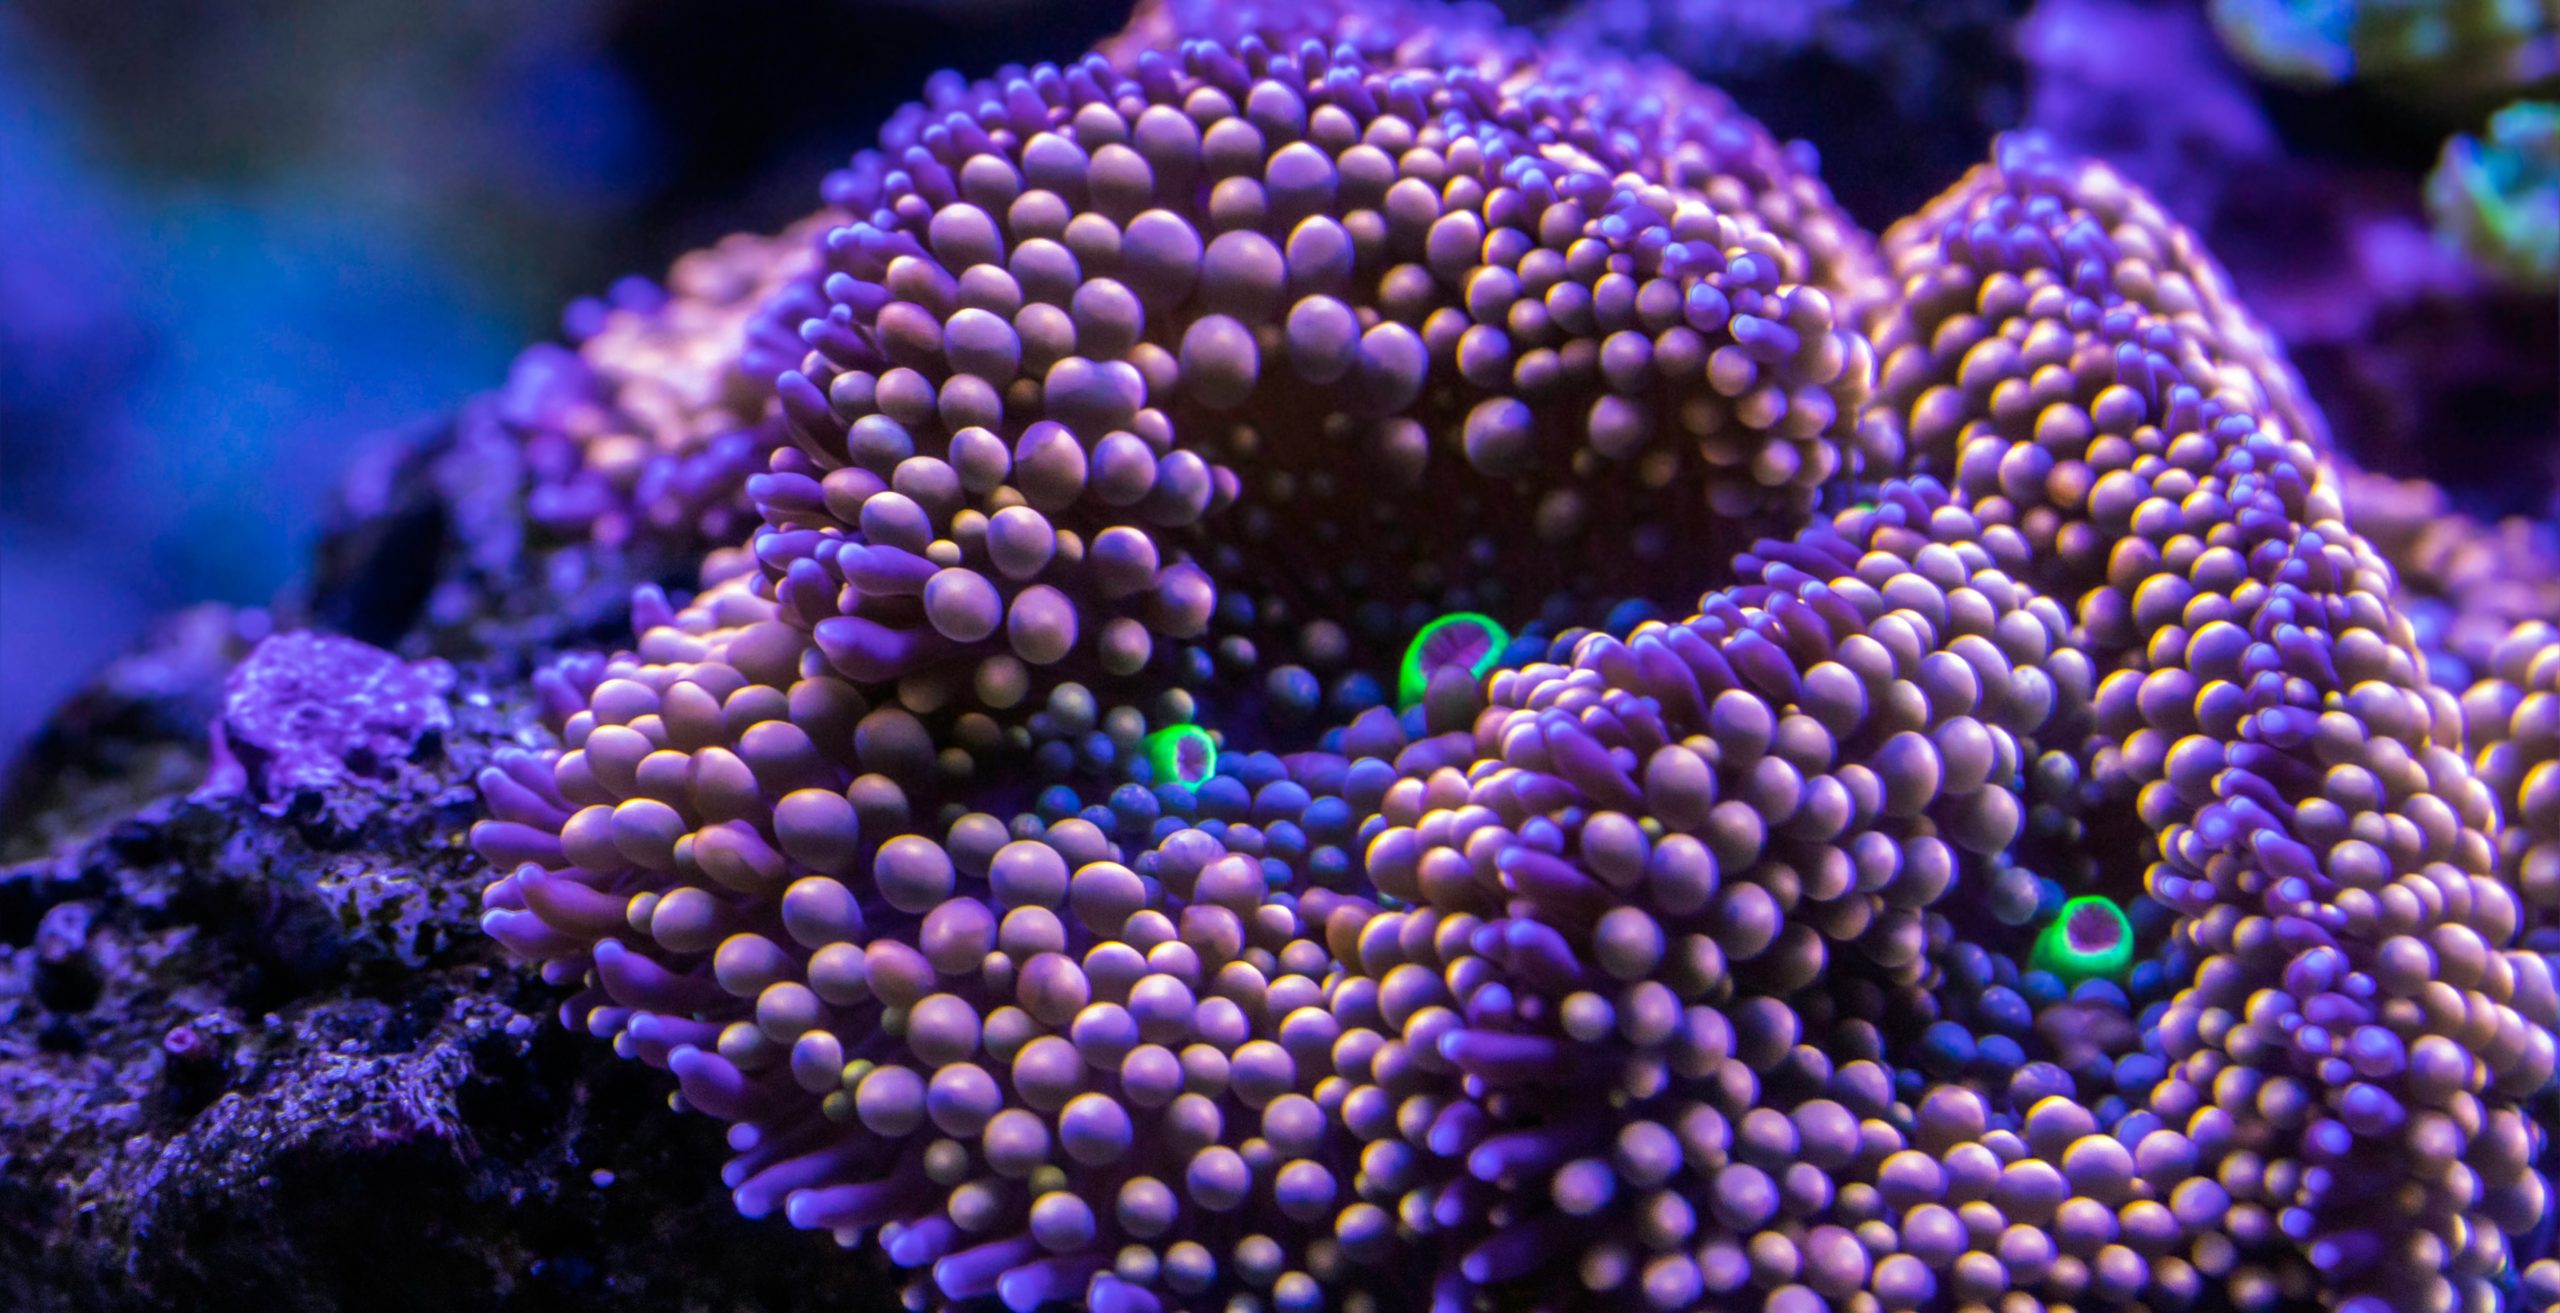 Engineering Reef Resiliency with CRISPR Gene Editing to Counter Climate Change